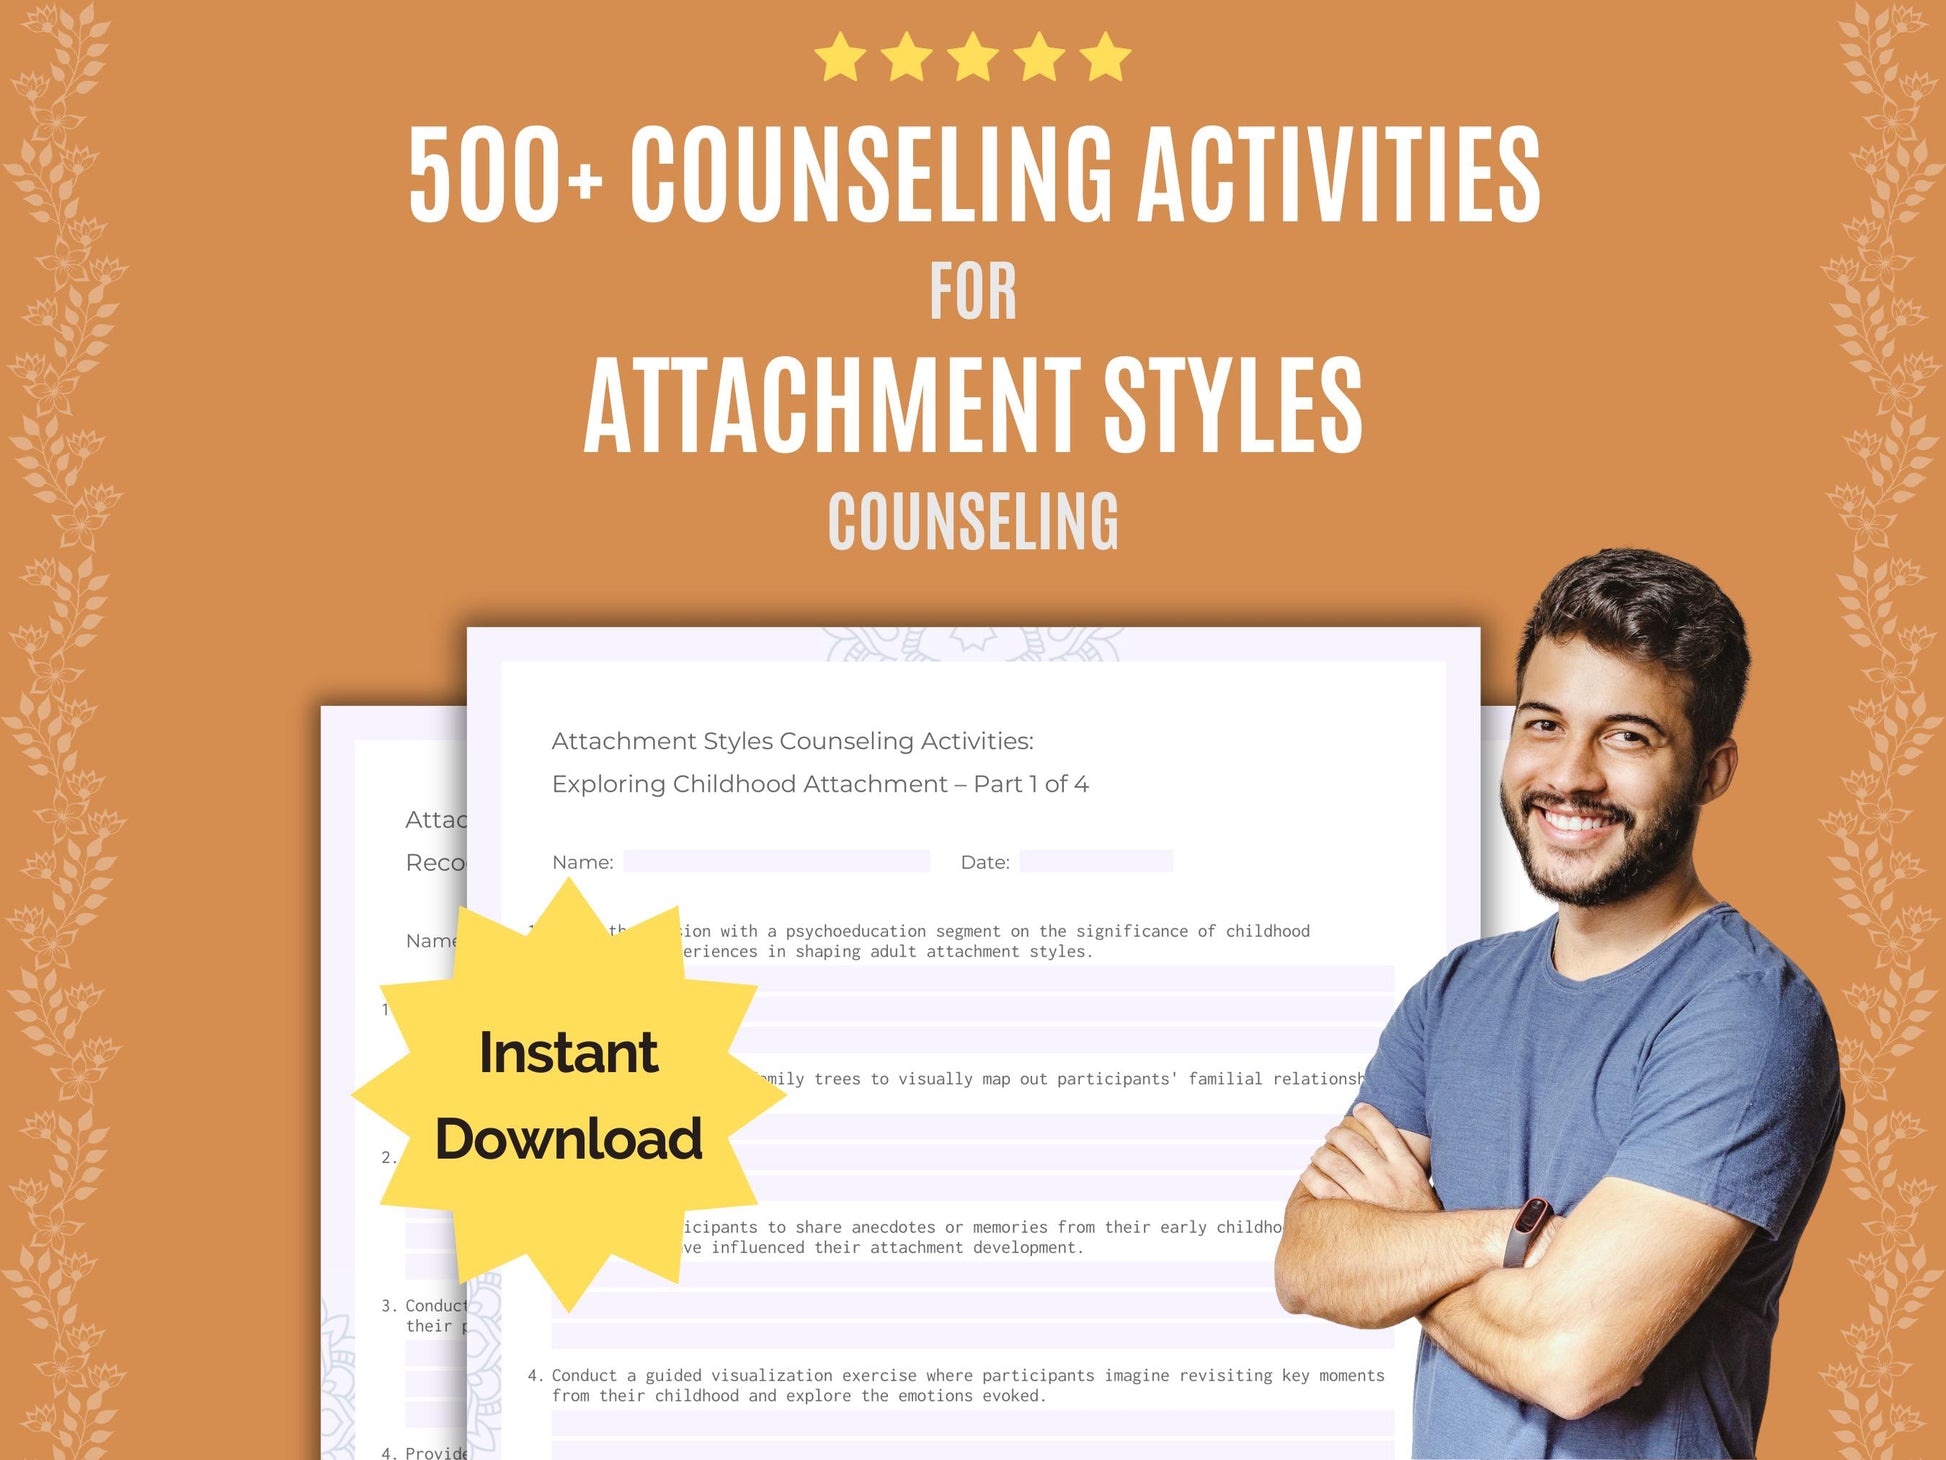 Attachment Styles Counseling Activities